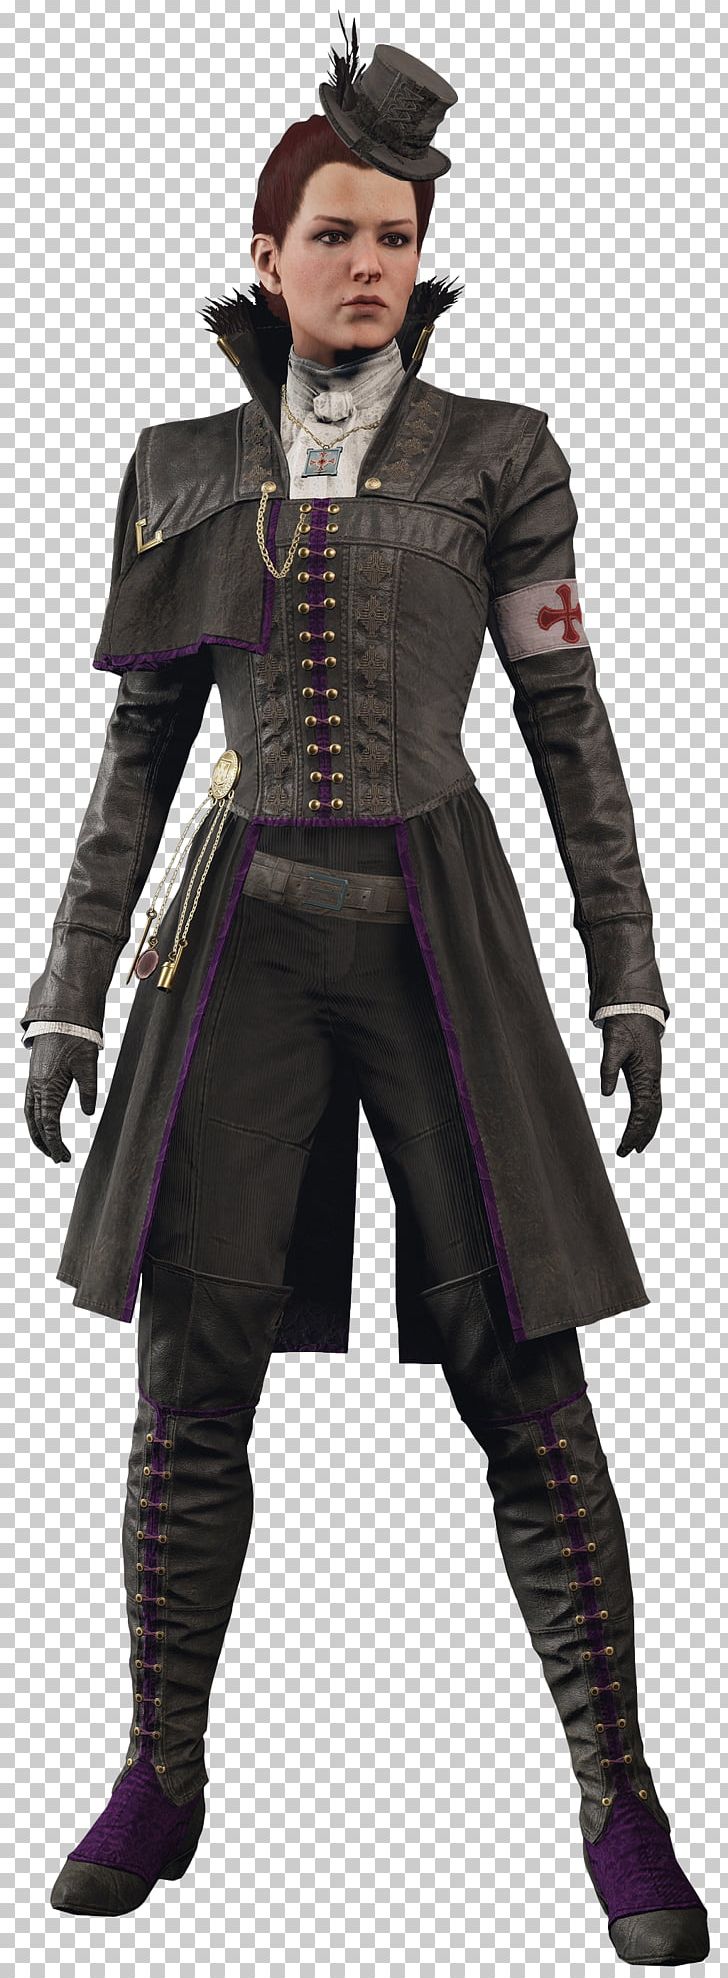 Assassin's Creed Syndicate Industrial Revolution Knights Templar Video Game PNG, Clipart, Assassin Creed Syndicate, Assassins, Assassins Creed, Assassins Creed Syndicate, Costume Free PNG Download